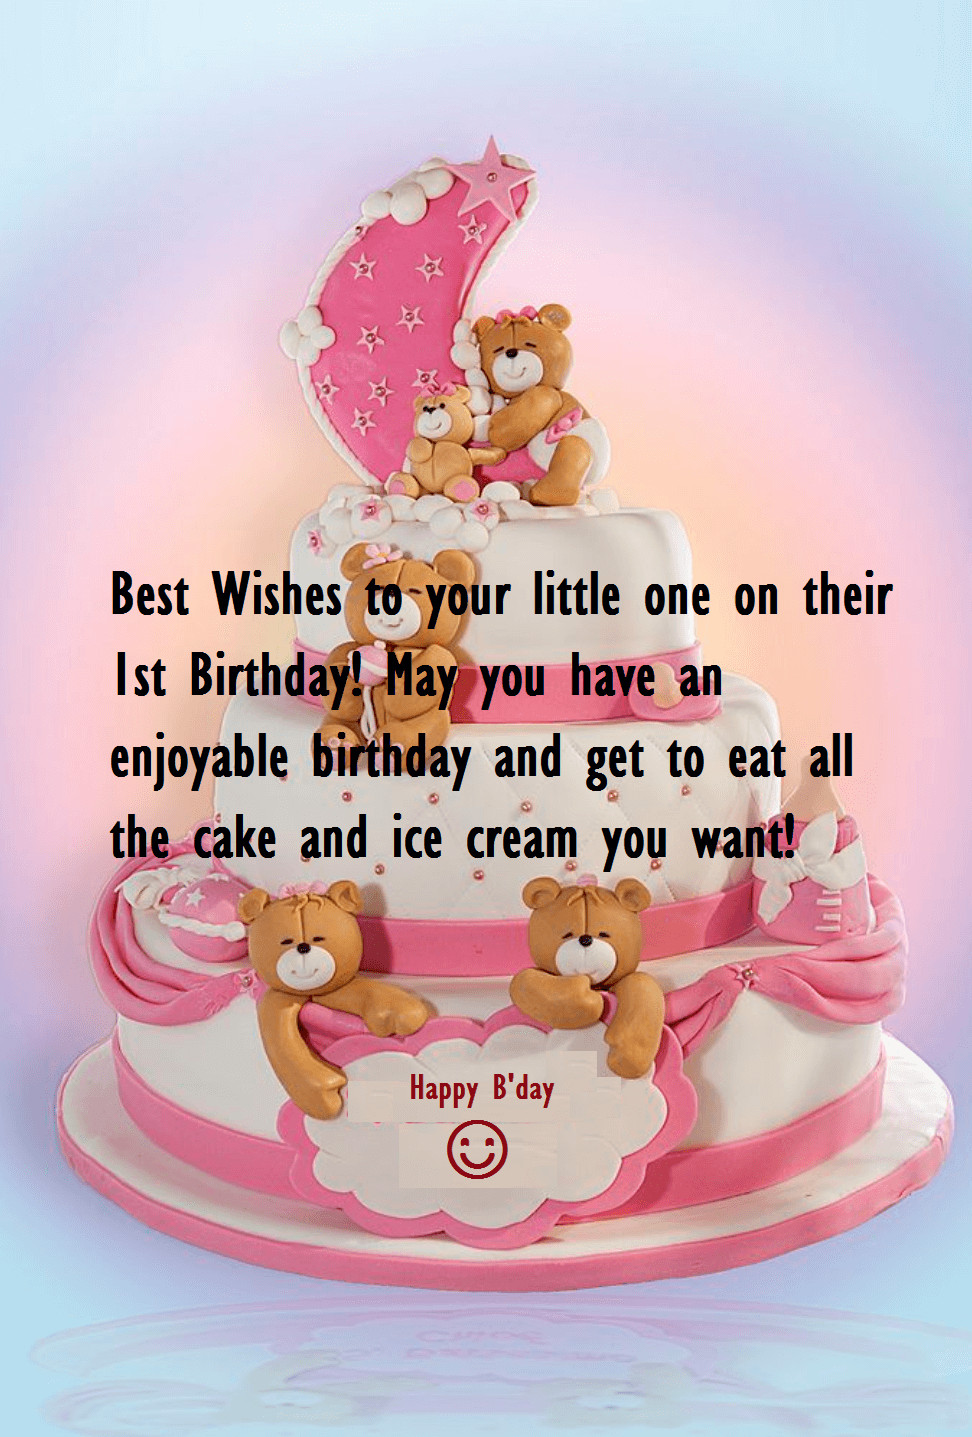 Birthday Wishes For One Year Old
 Cute Birthday Cake Wishes For Baby e Year Old